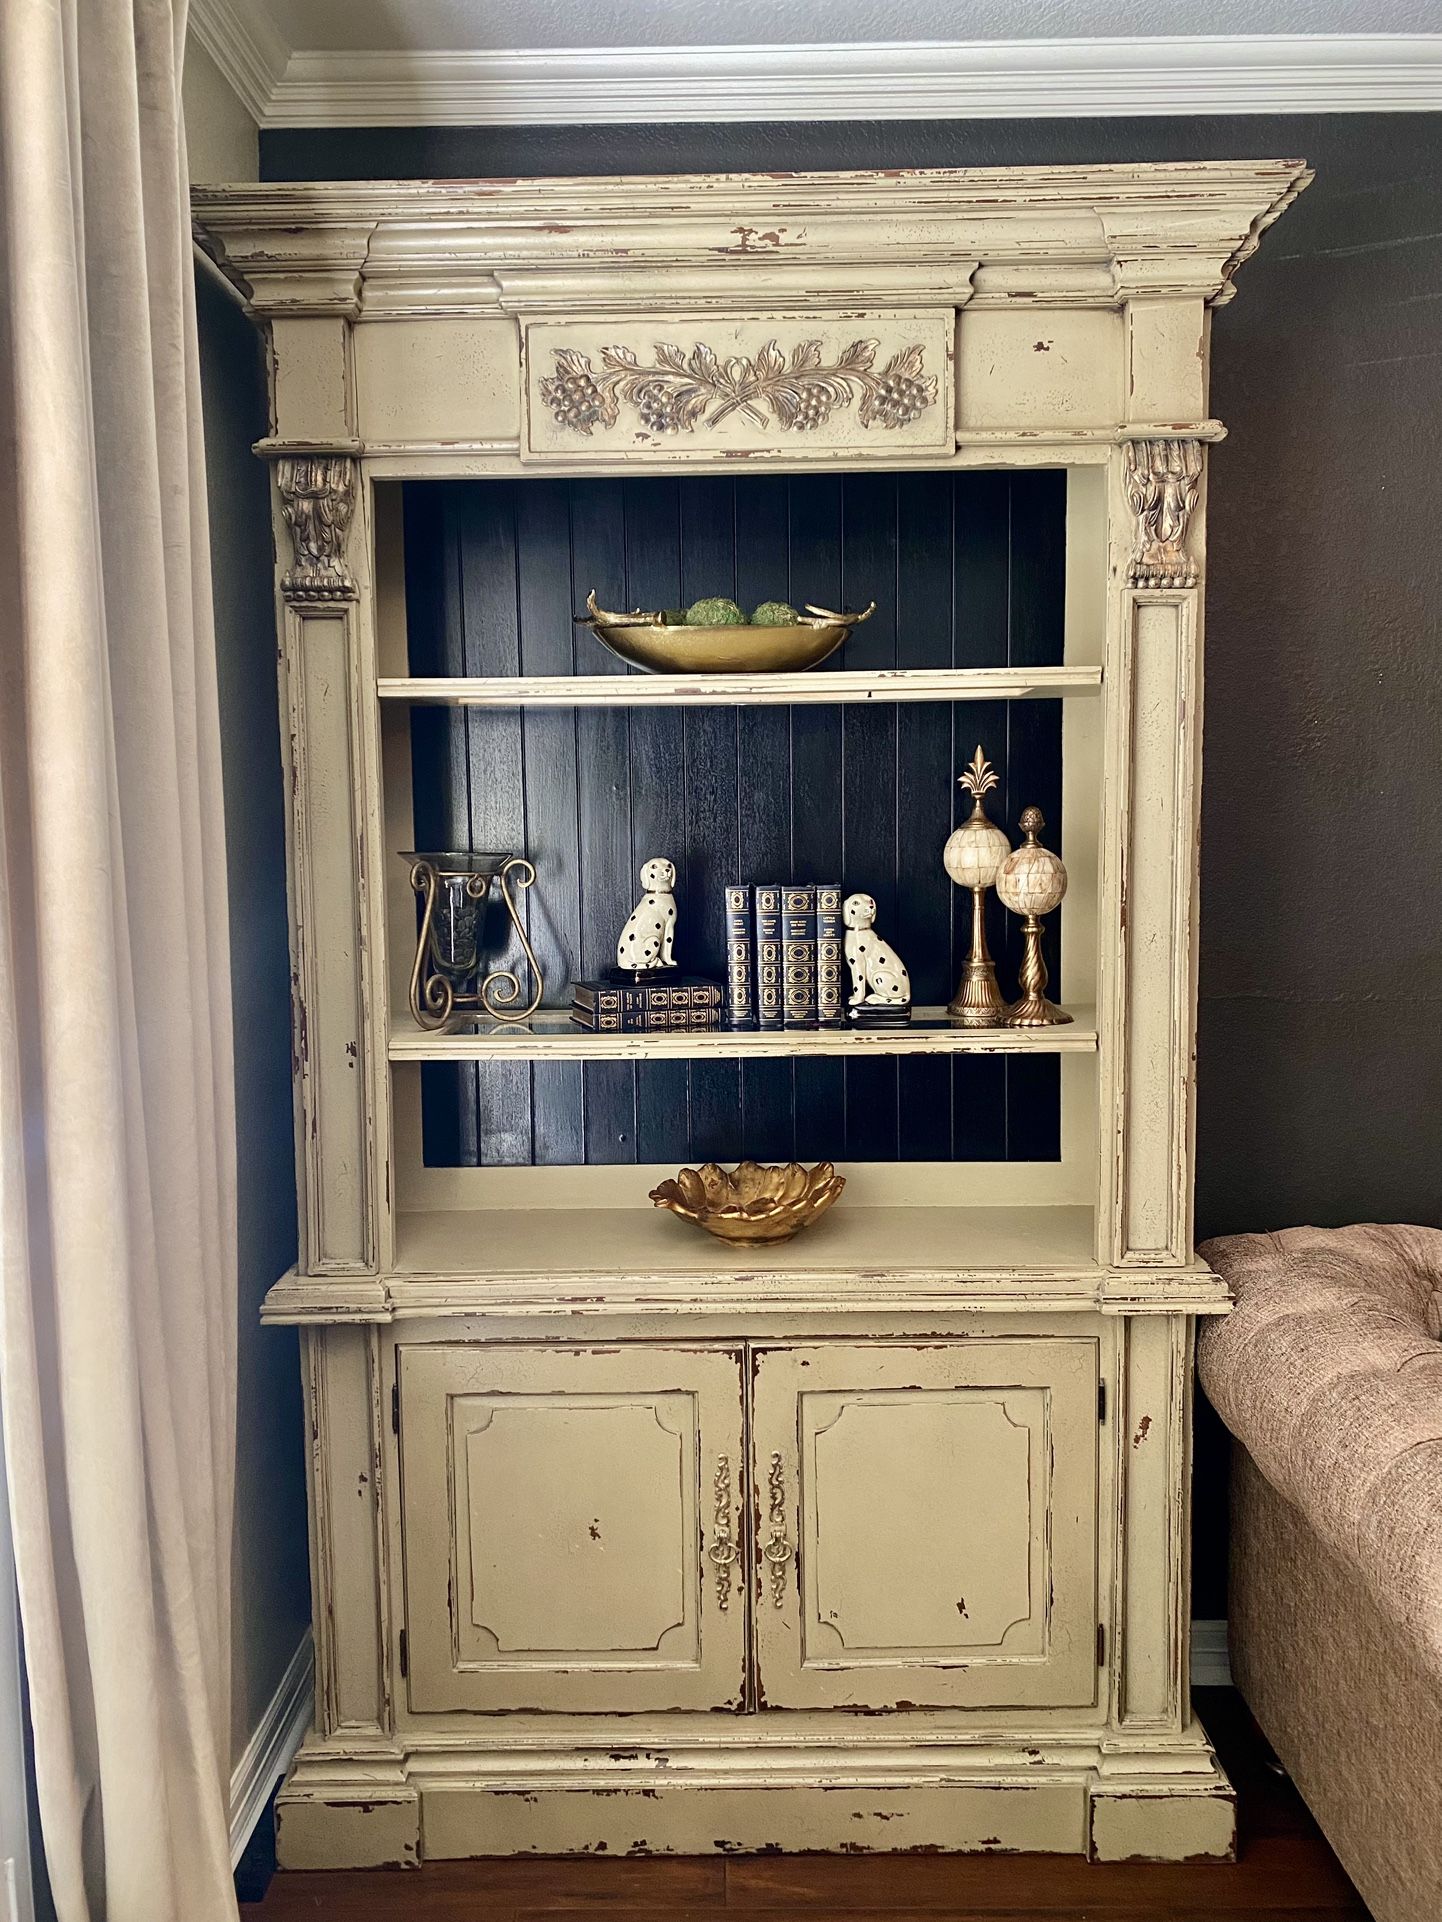 PENDING PICK UP- Heritage Collection Distressed Bookshelf